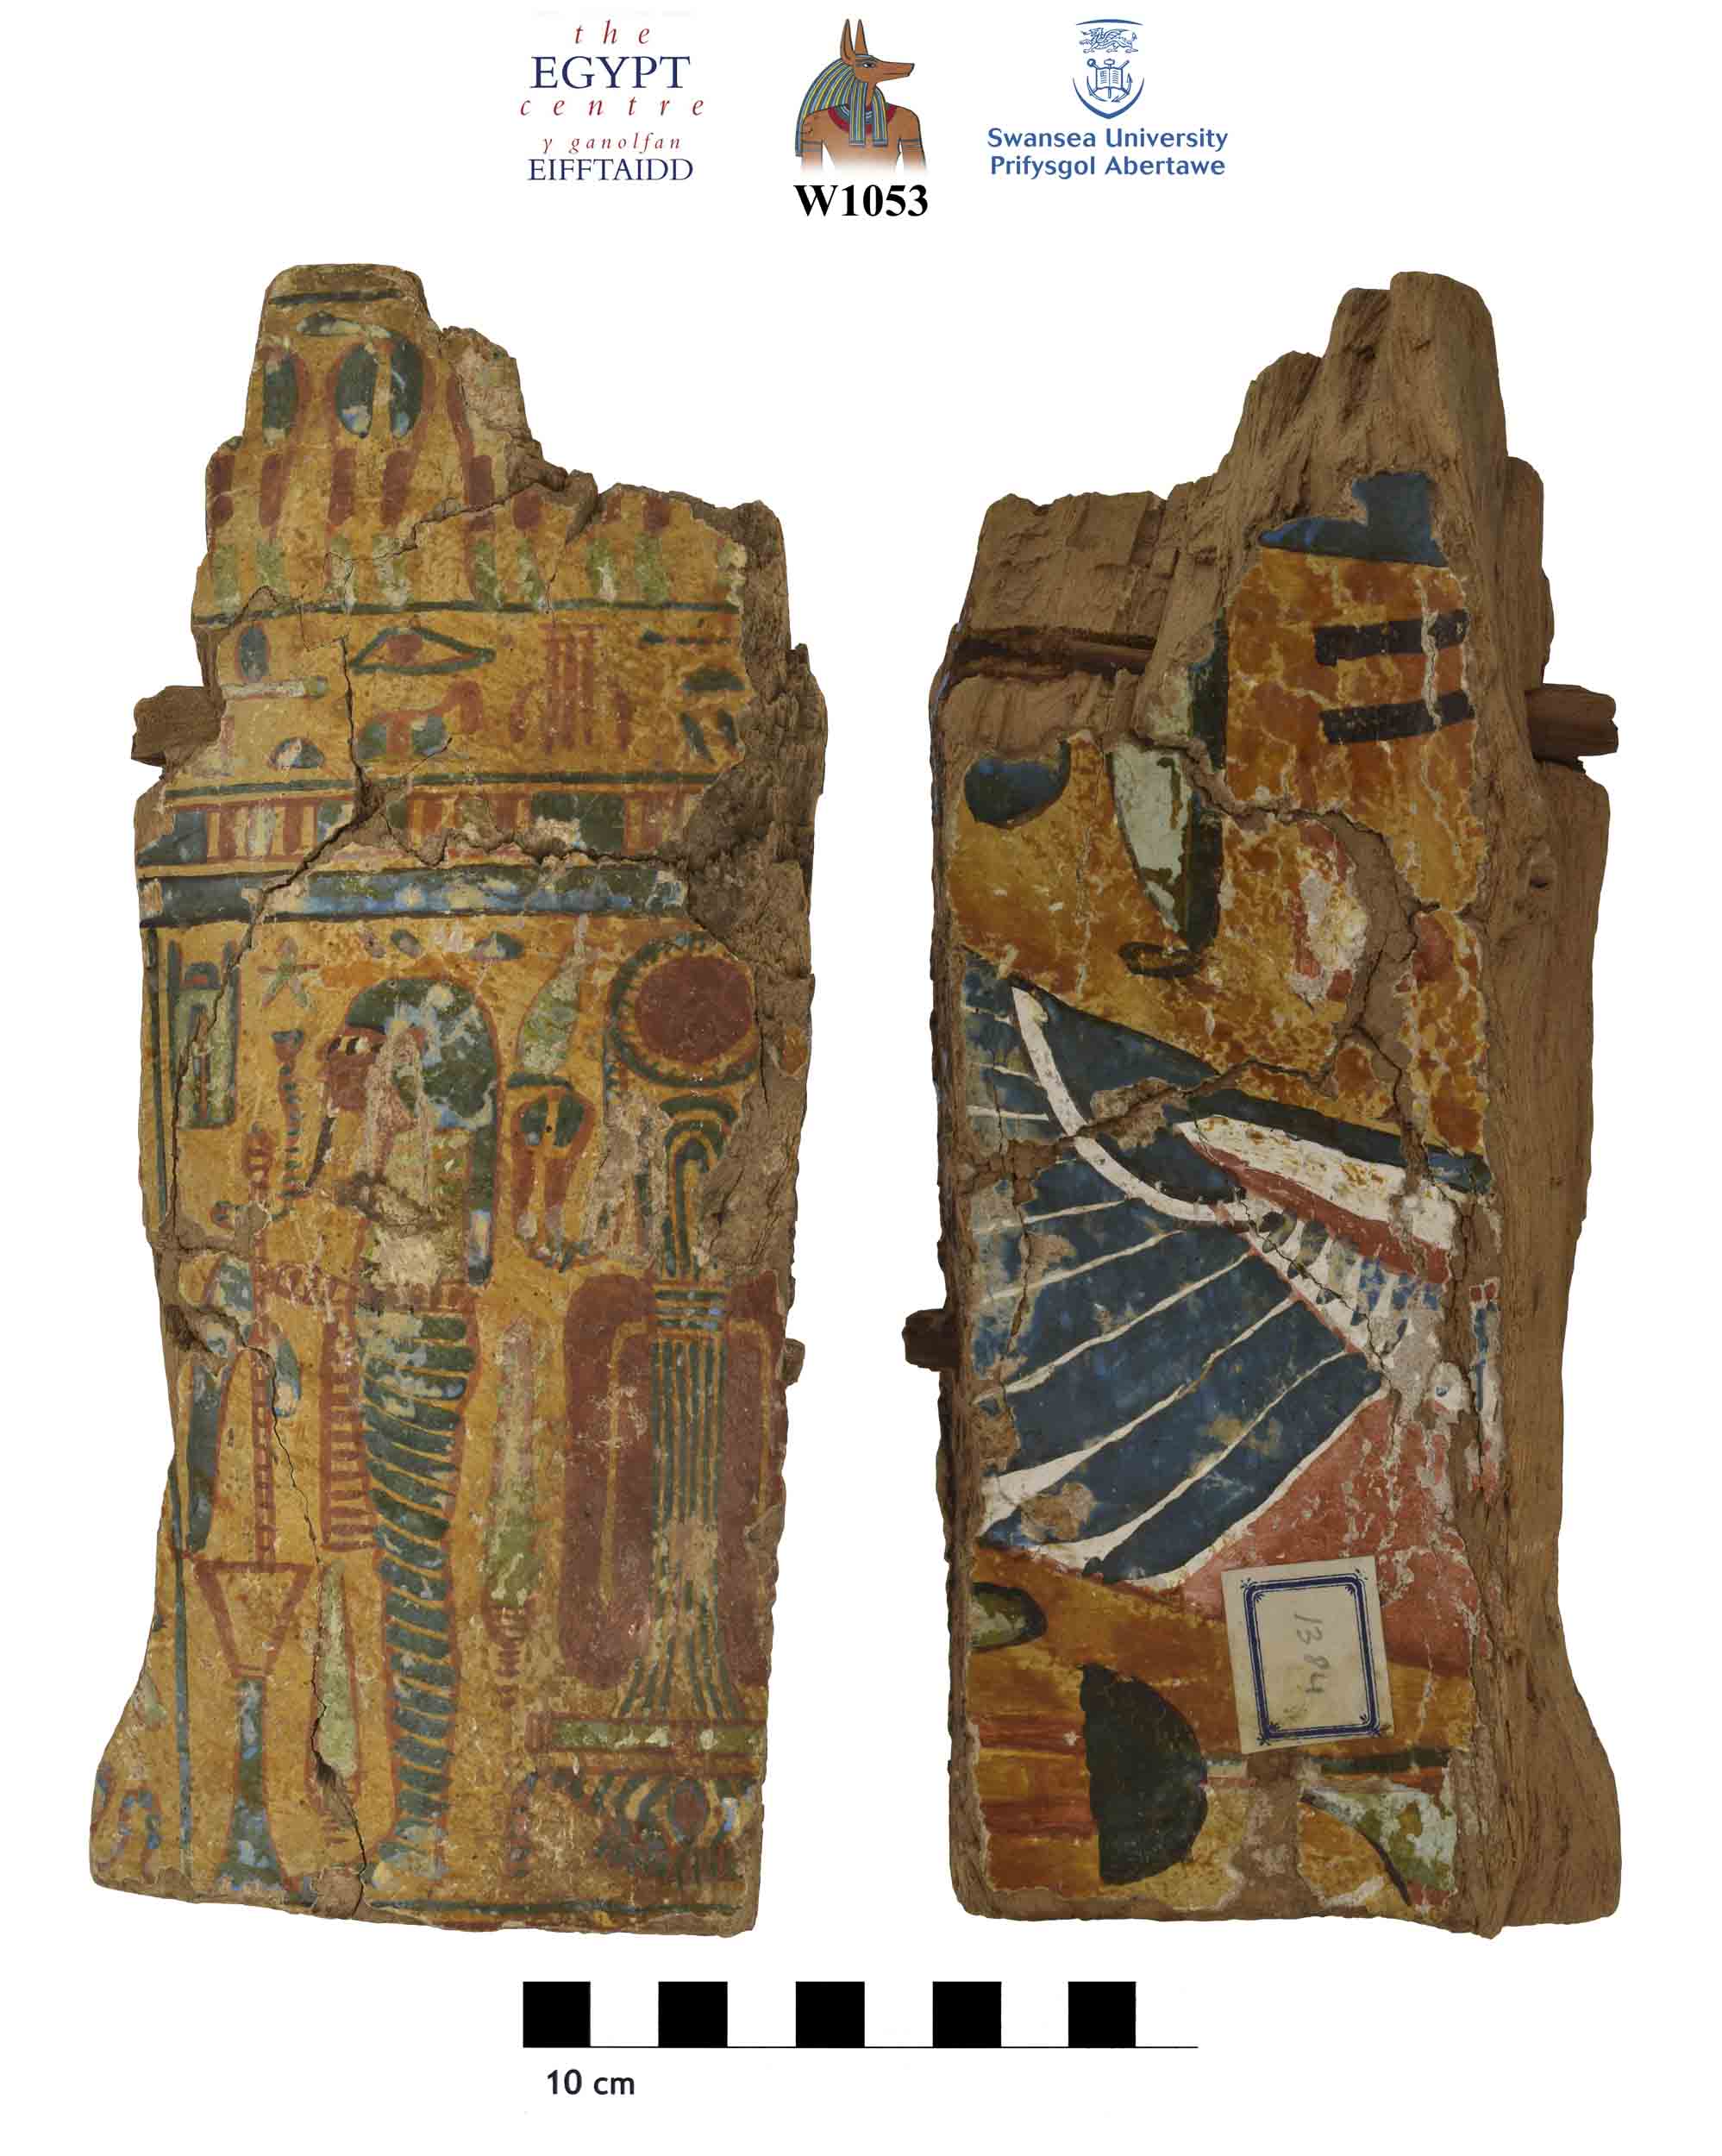 Image for: Fragment of a coffin